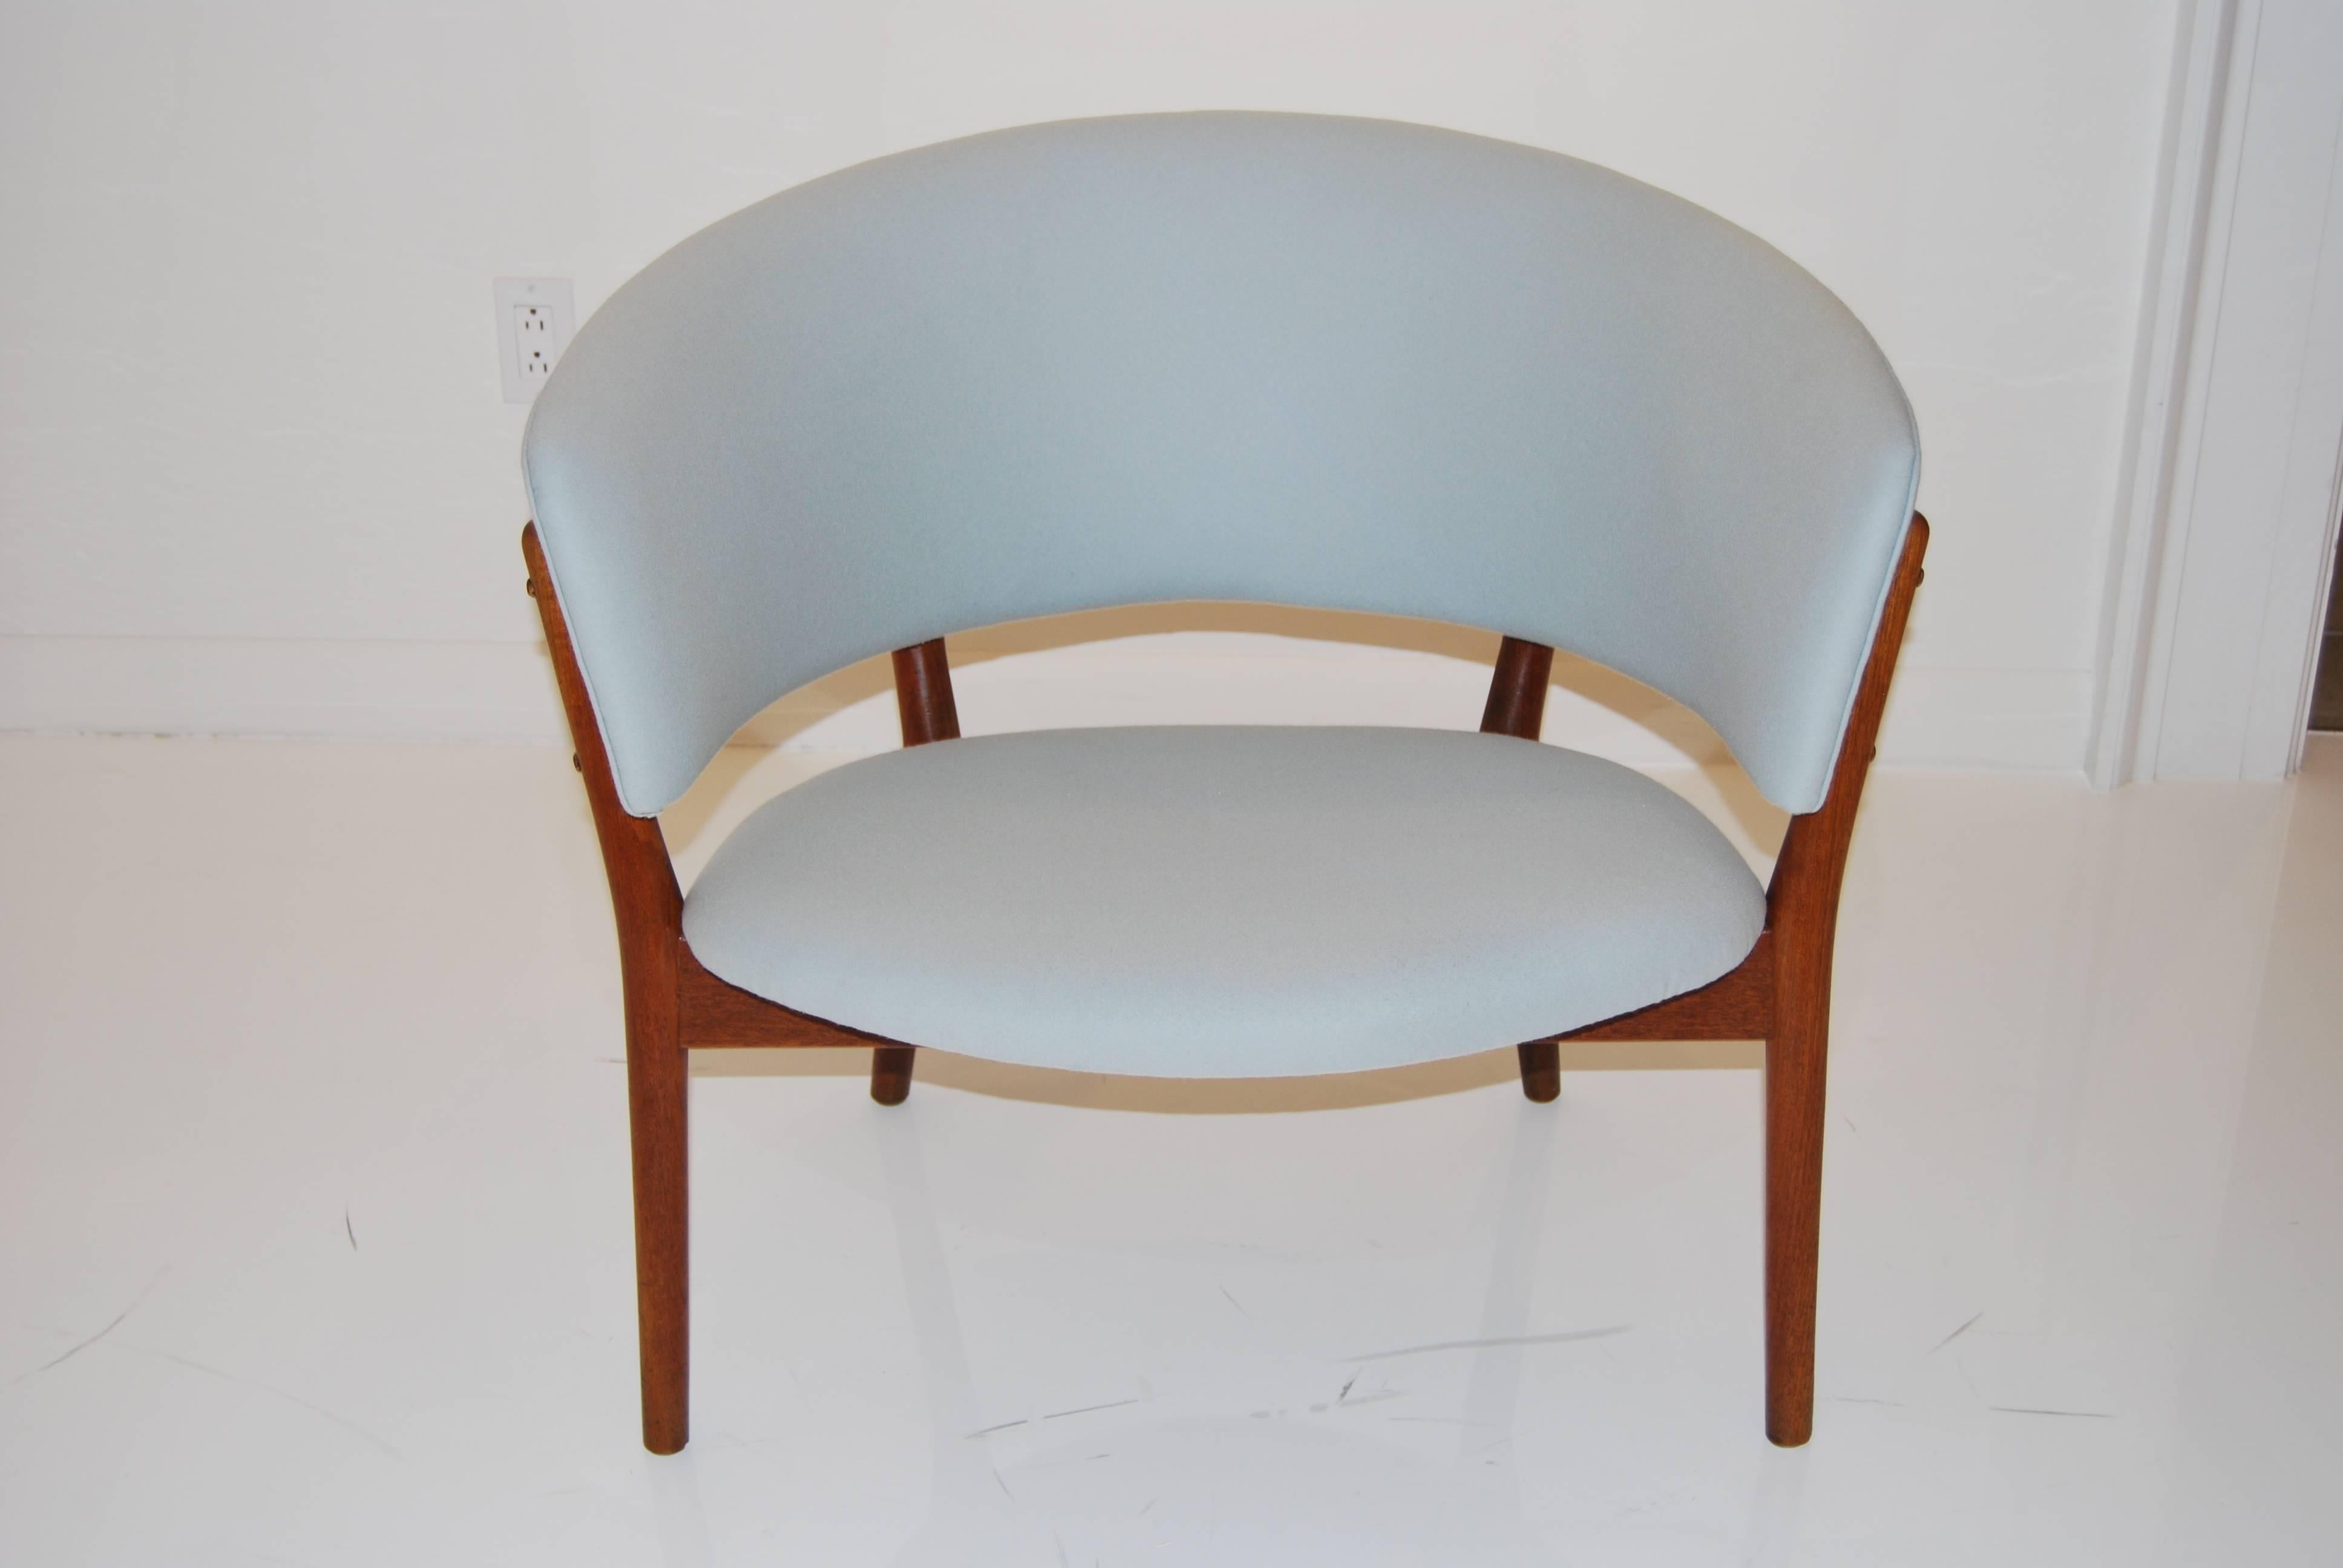 Original tub chair, designed by Nanna Ditzel in 1952 and produced by Soren Willadsen. Teak frame has been beautifully refinished, seat and back have been reupholstered in light blue wool.